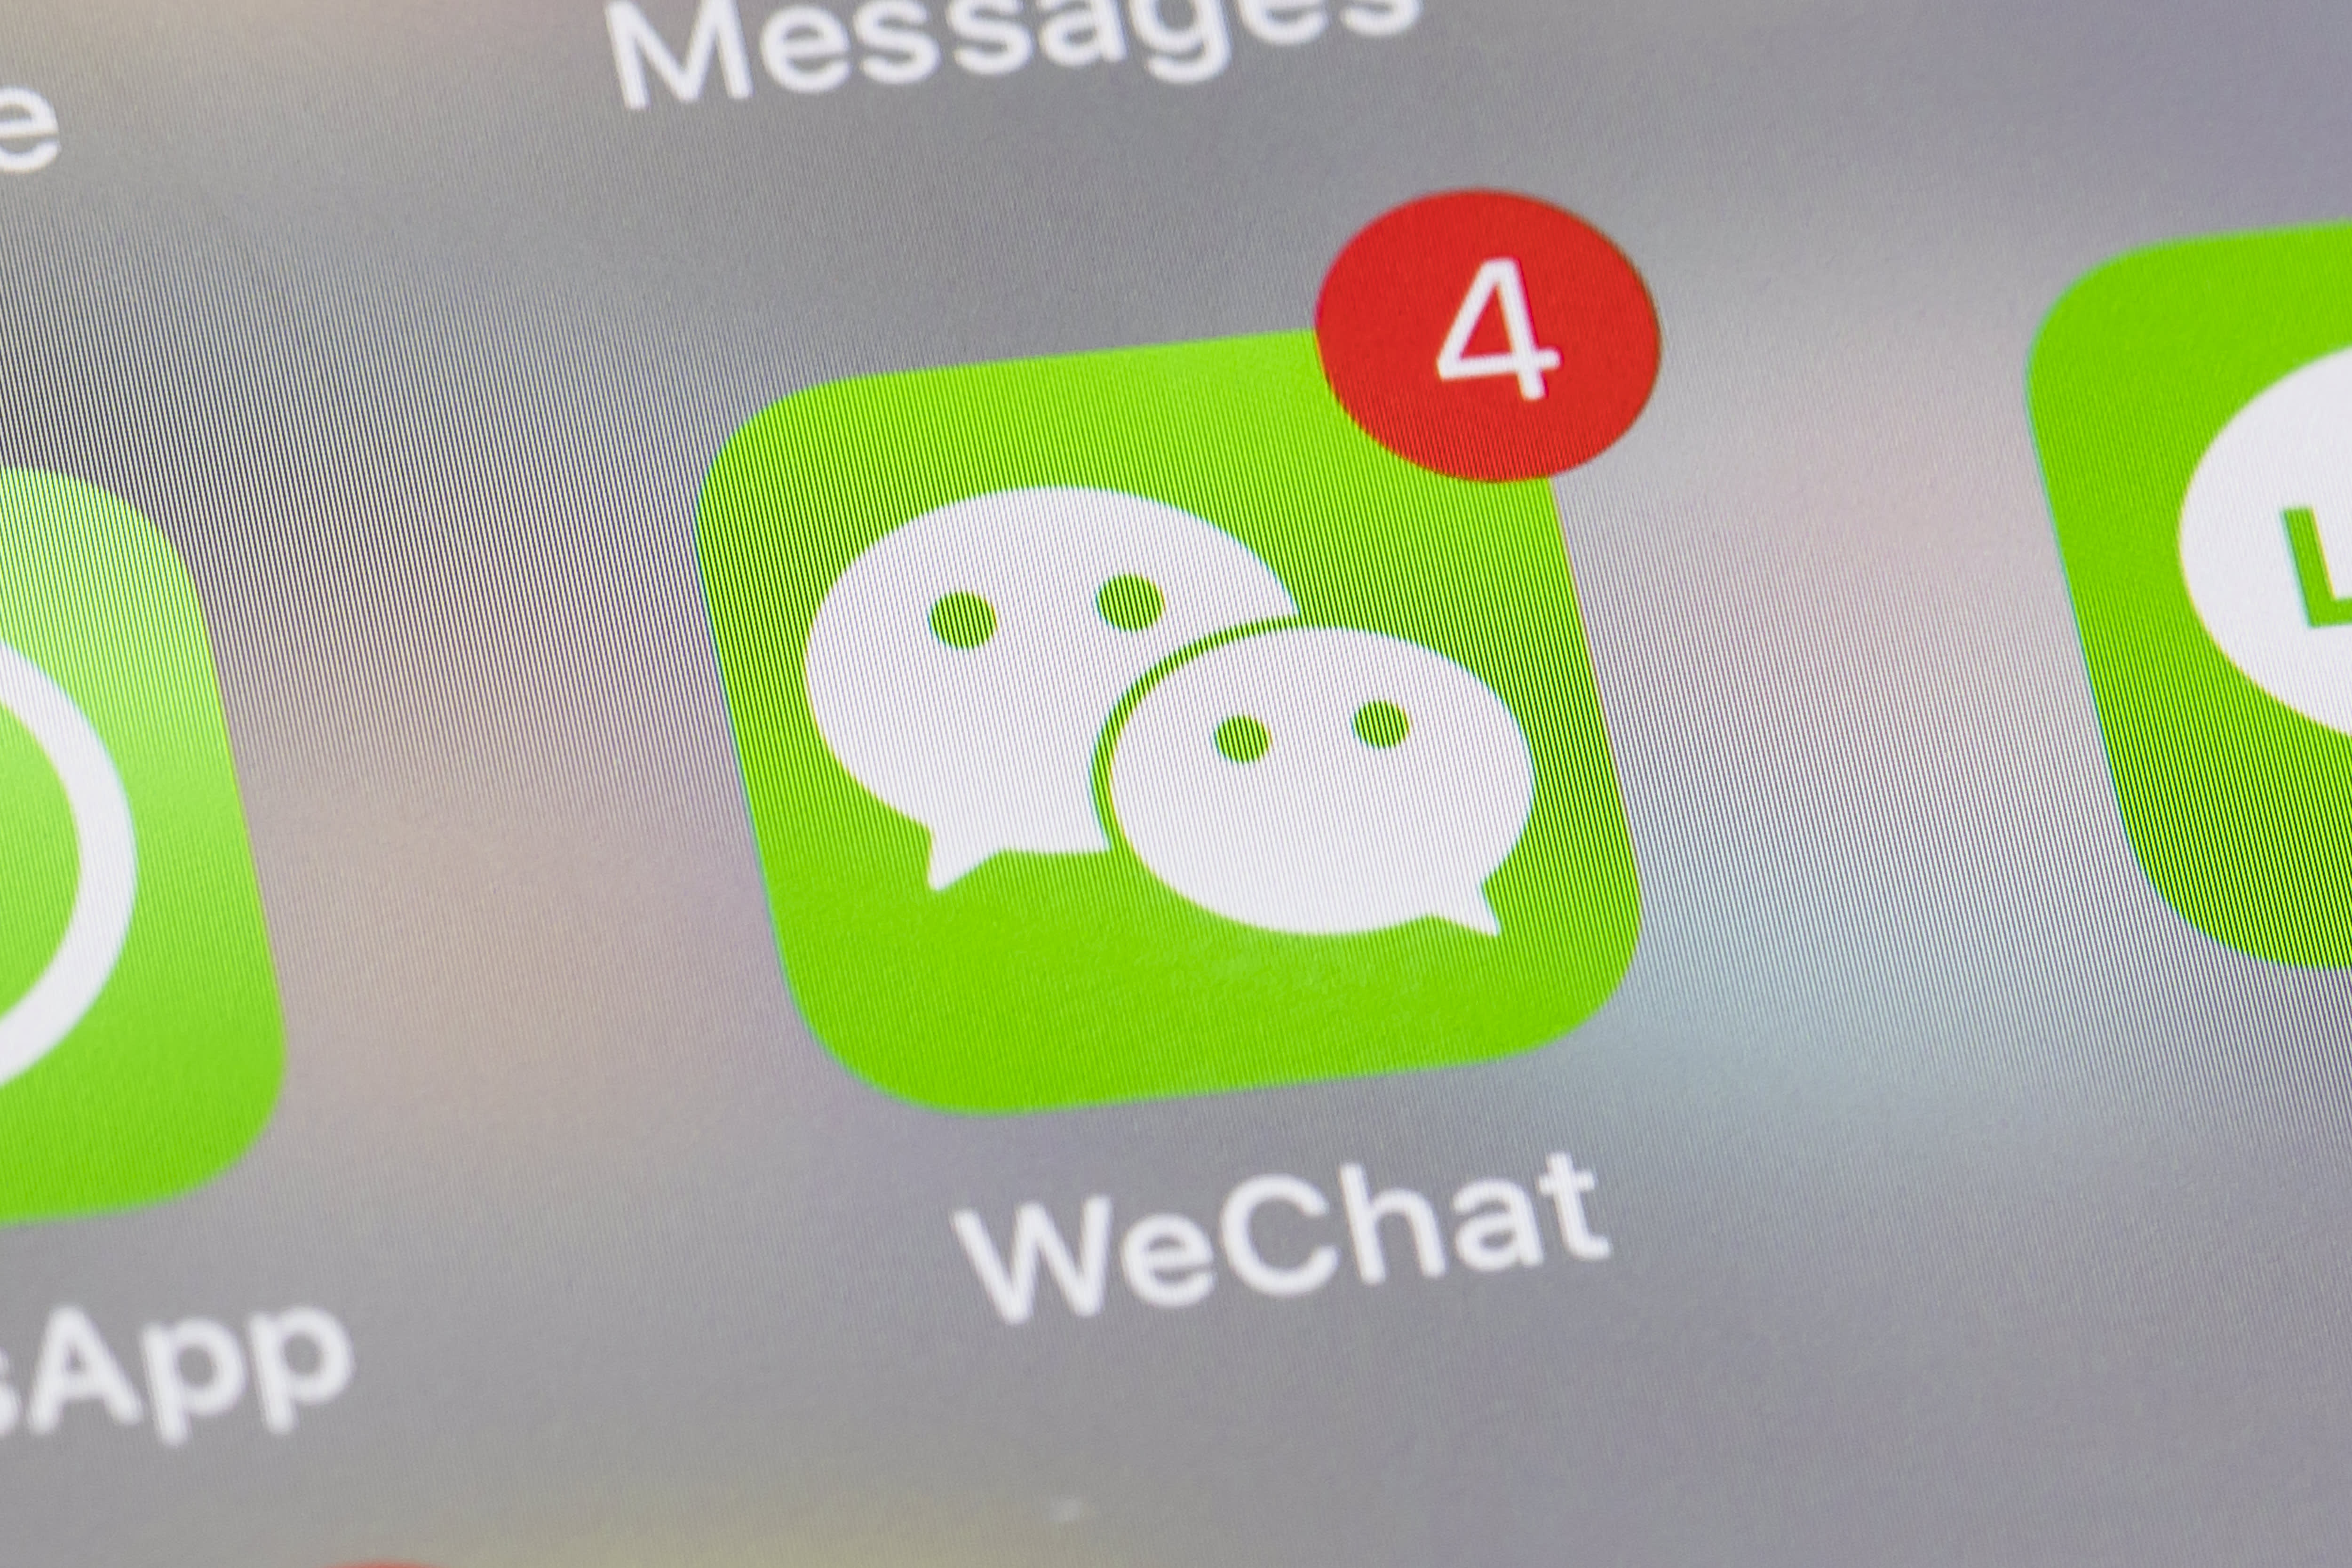 Sign up wechat with email